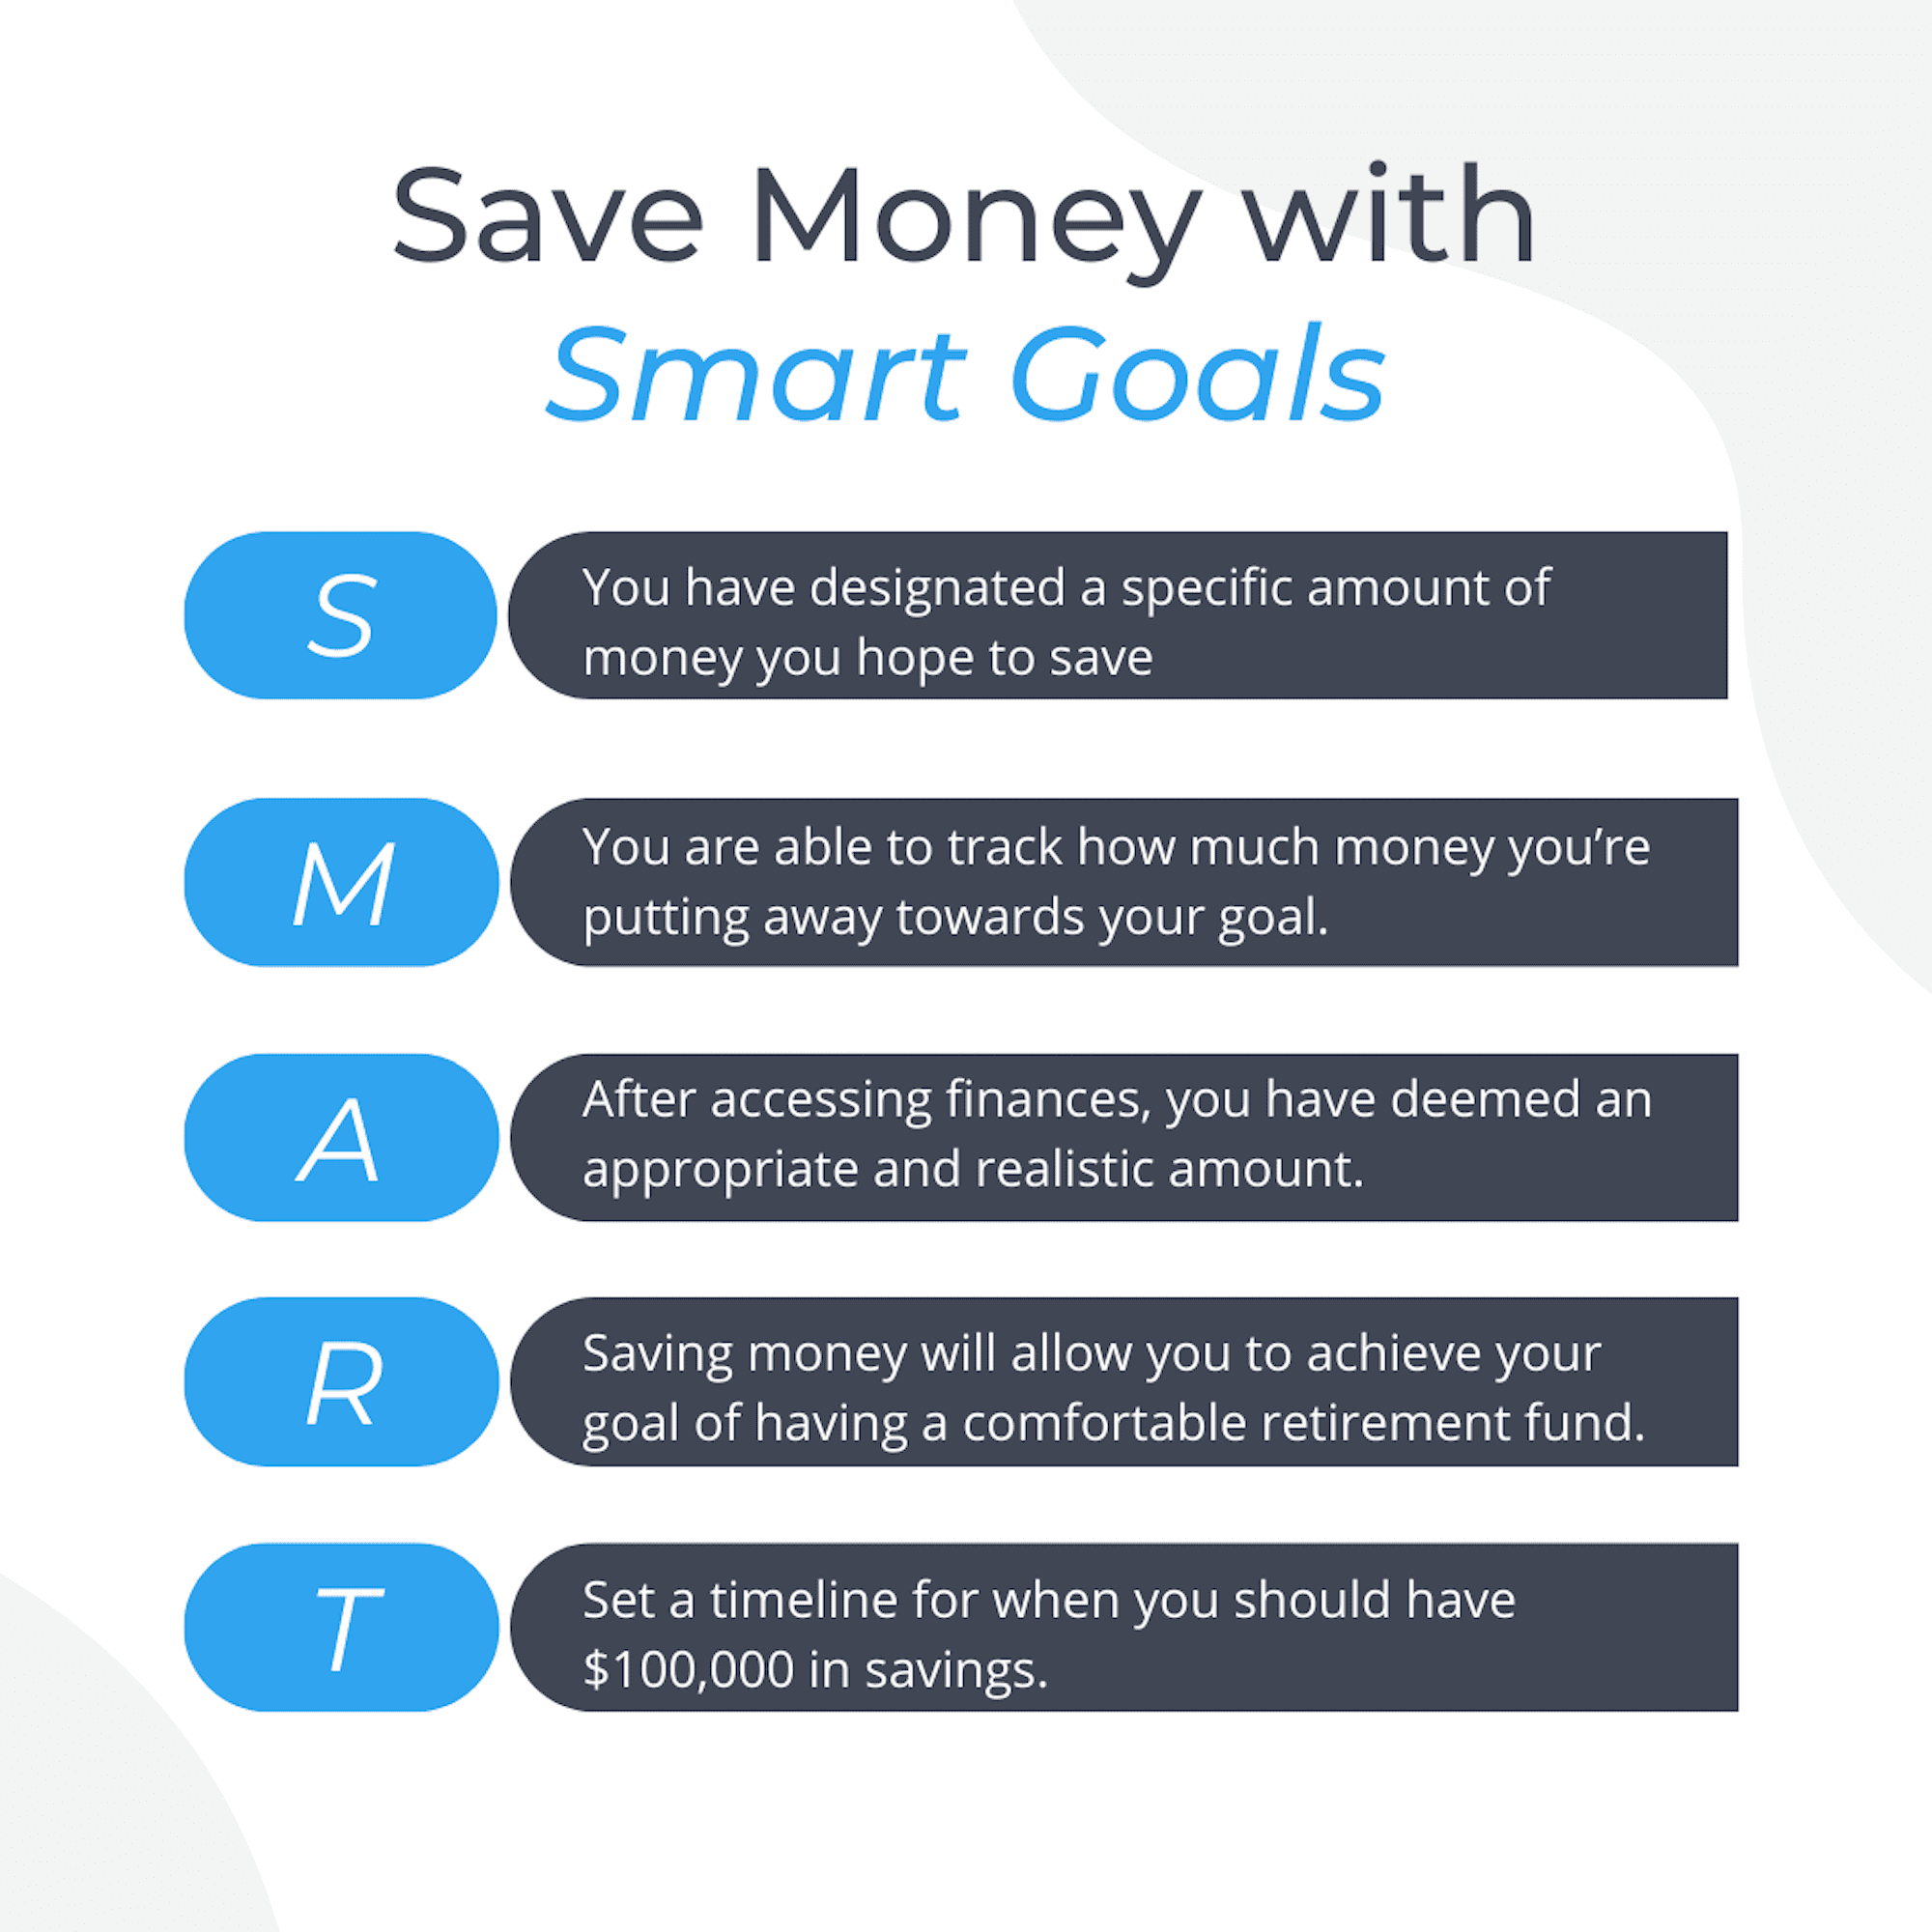 How To Set SMART Goals To Help You Succeed?